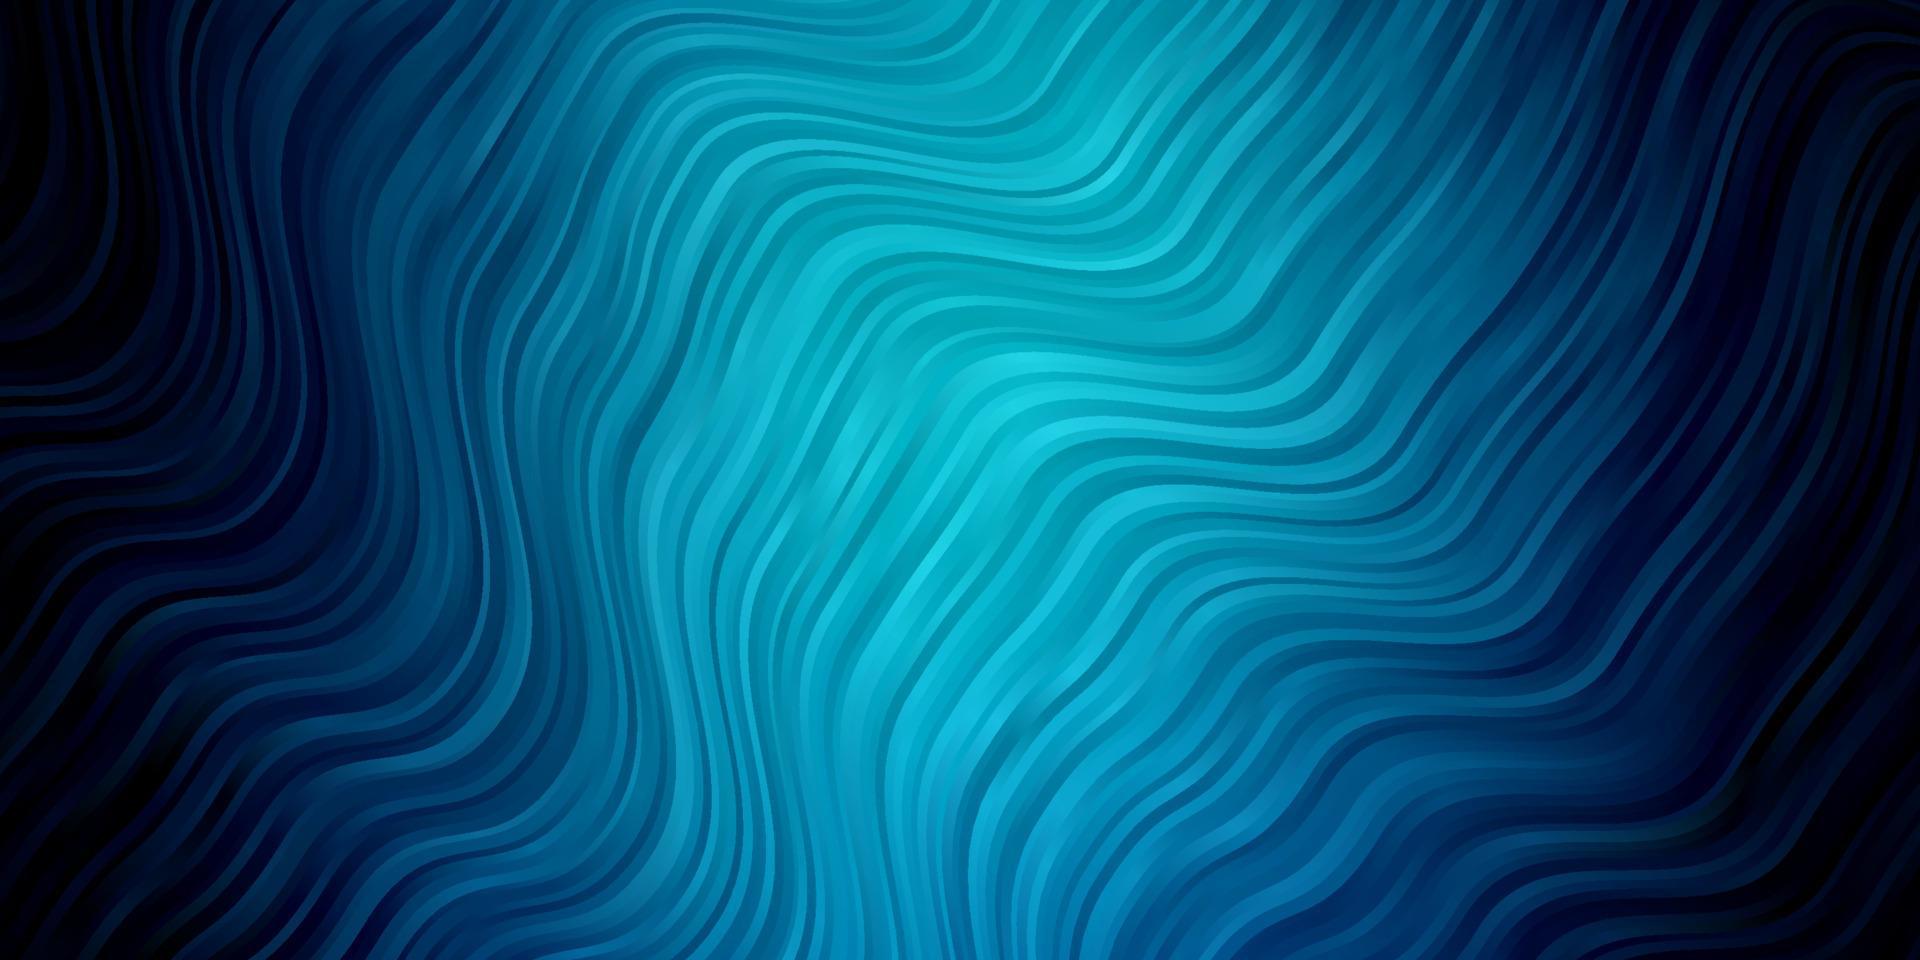 Light BLUE vector layout with wry lines.